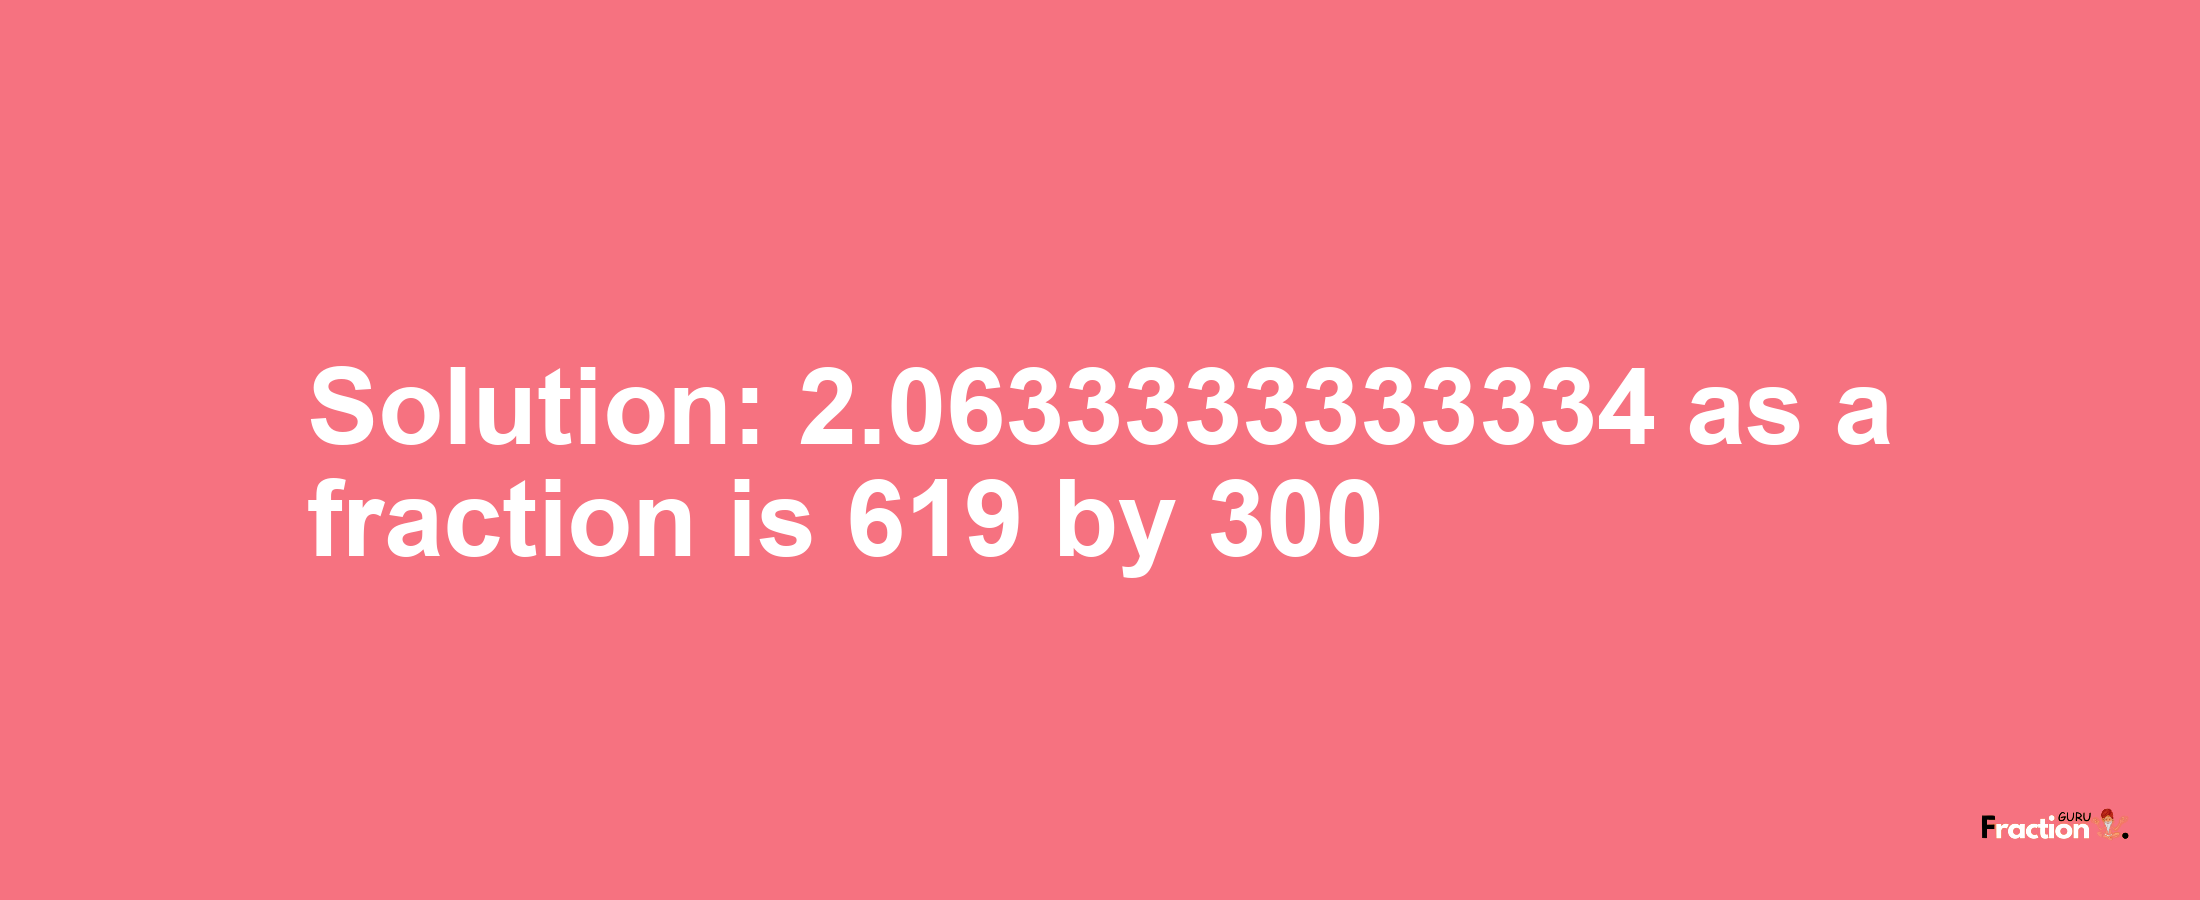 Solution:2.0633333333334 as a fraction is 619/300